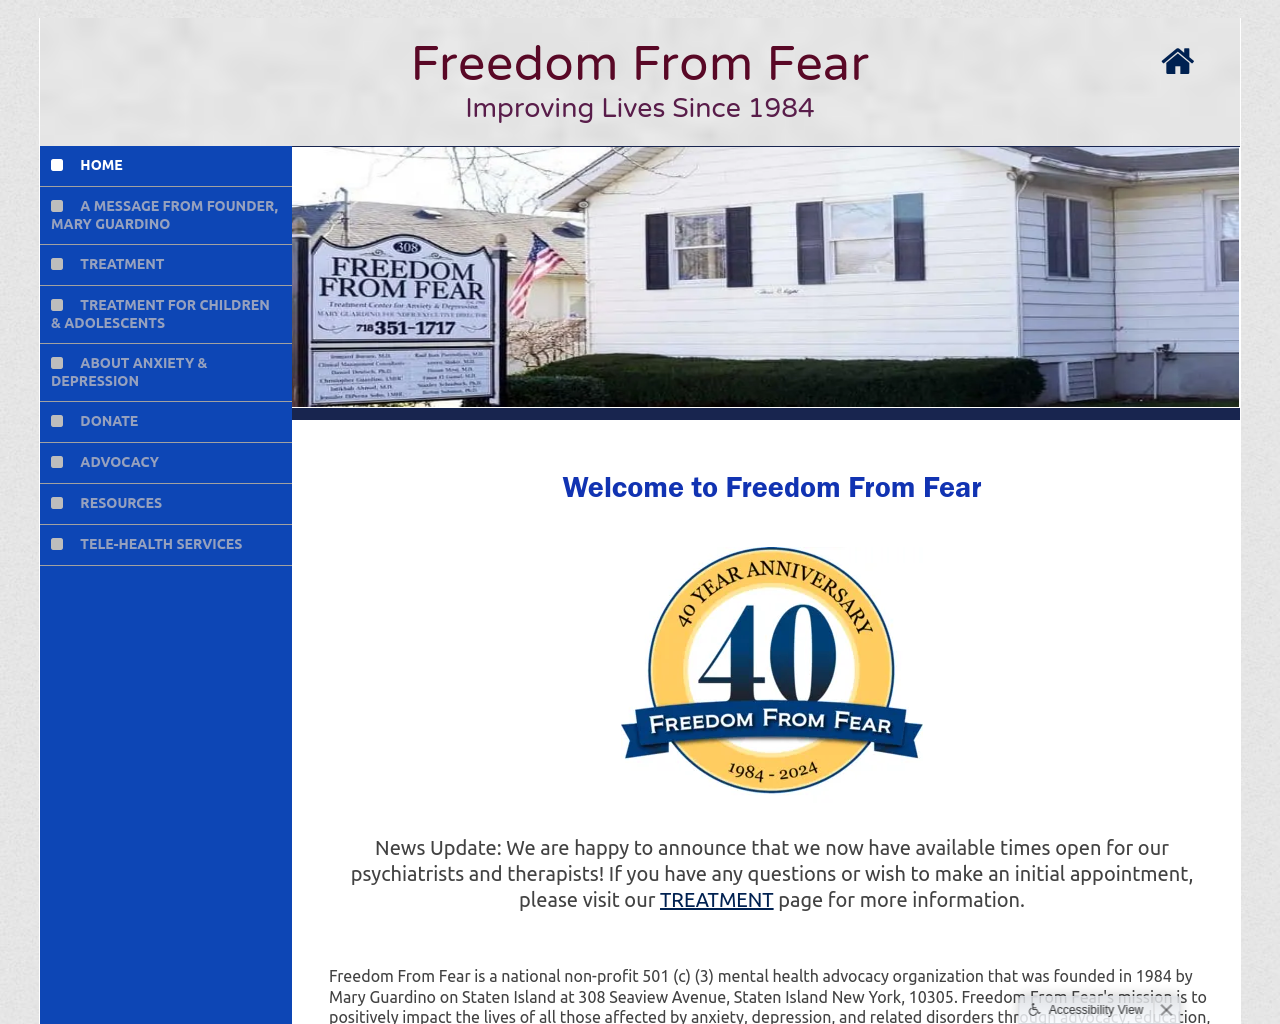 freedomfromfear.org